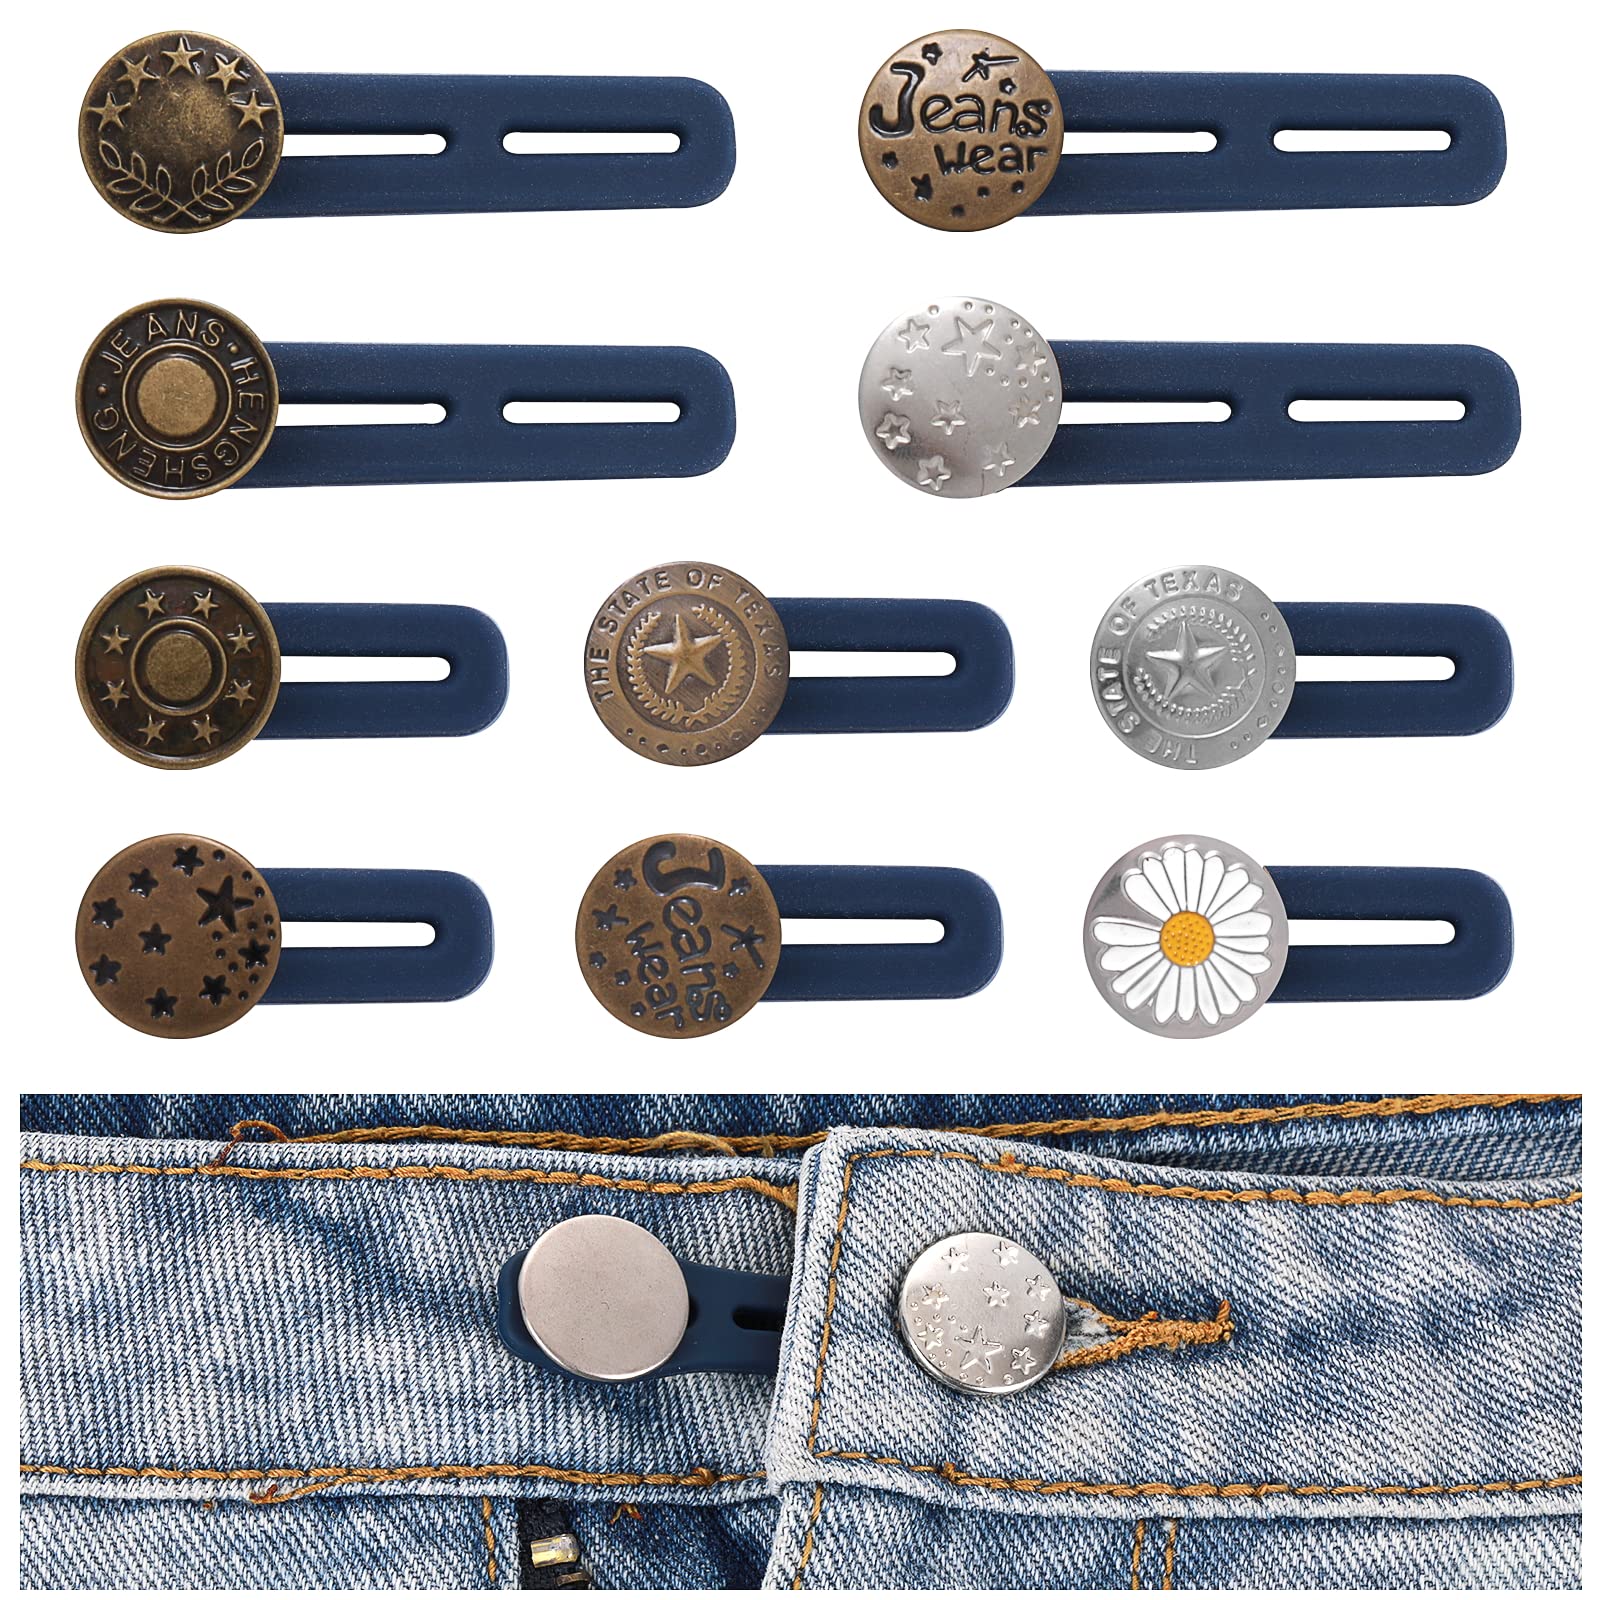 10pcs 17mm Denim Jeans Buttons With Rivets, No-sewing Metal Button